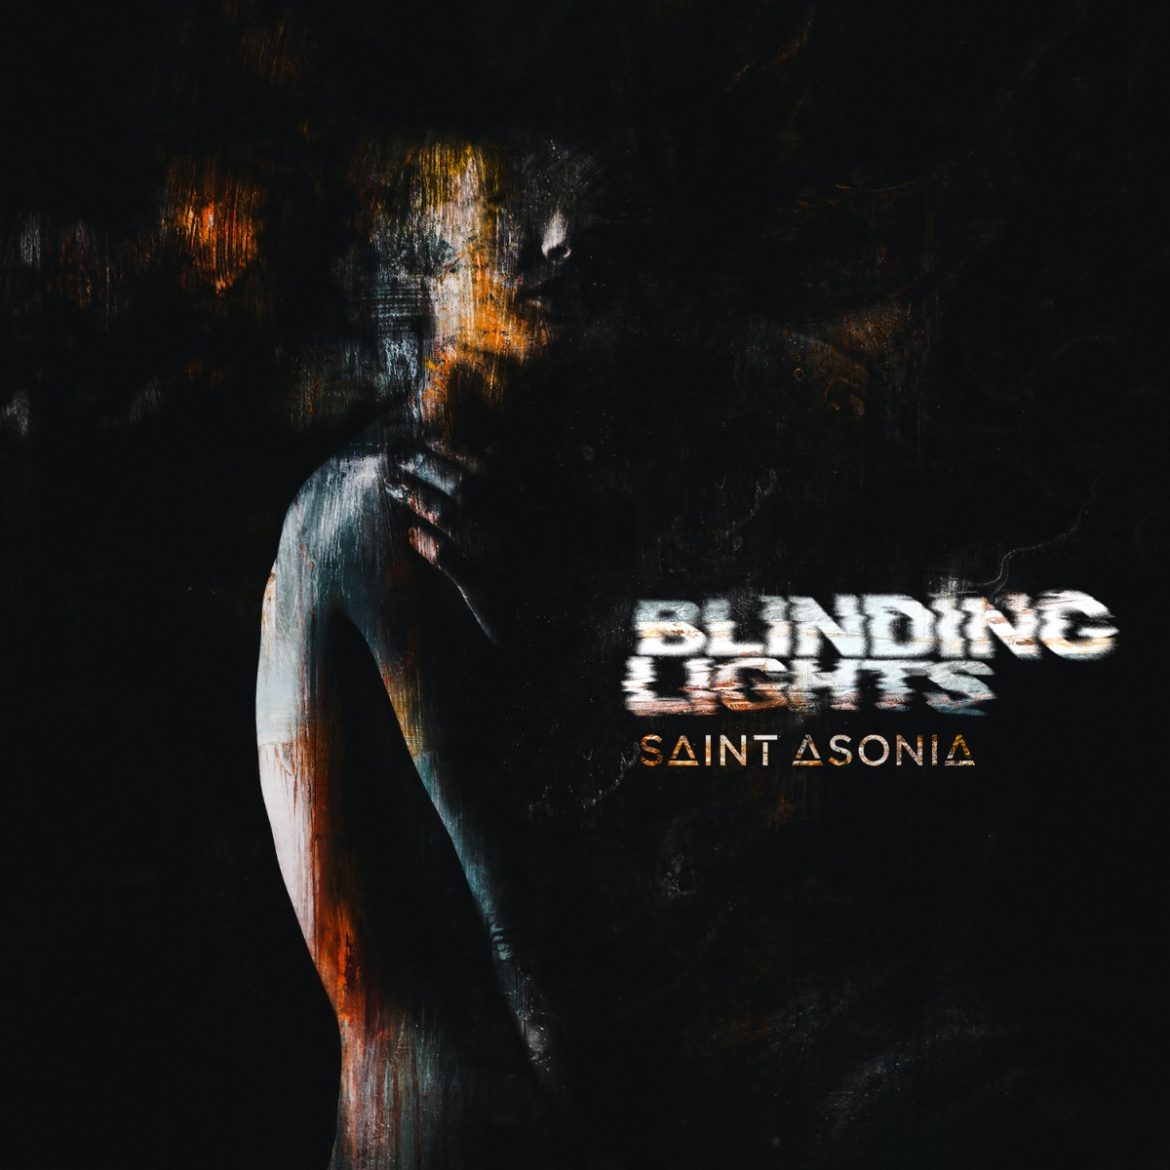 Saint Asonia Cover The Weeknd’s “Blinding Lights”